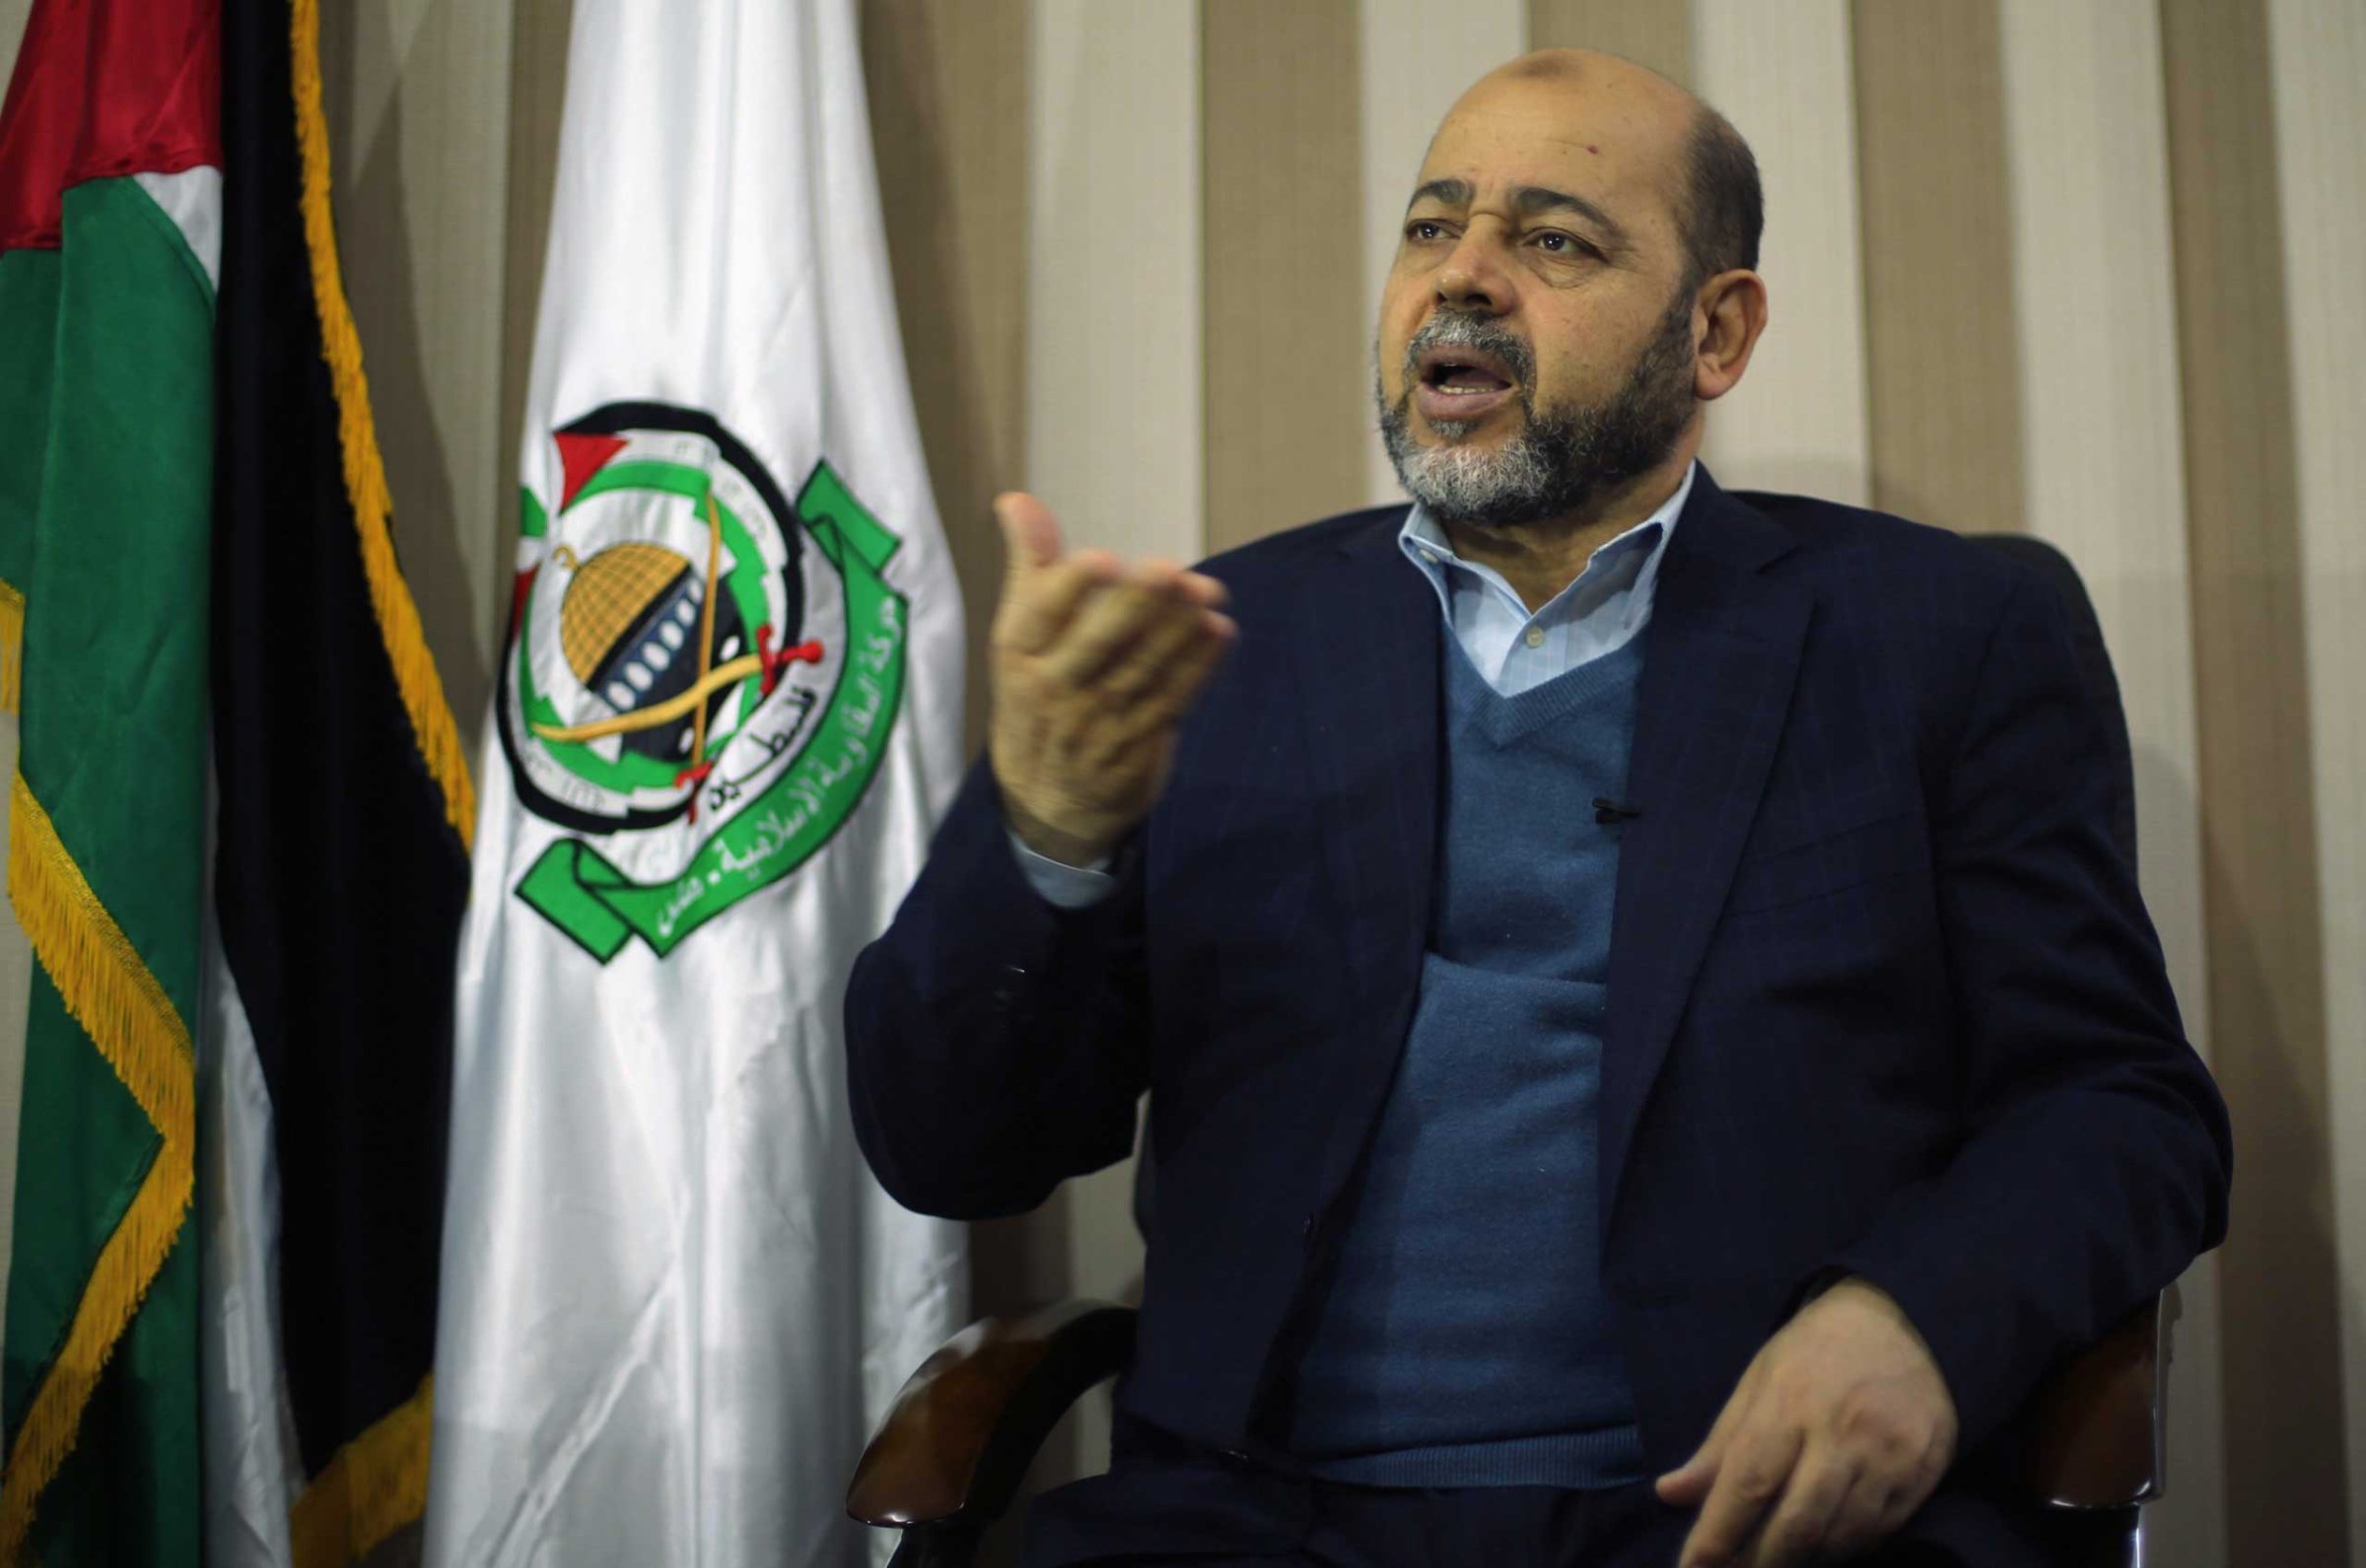 Deputy Hamas chief Moussa Abu Marzouk gestures during an interview with Reuters in Gaza City, Dec. 17, 2014.